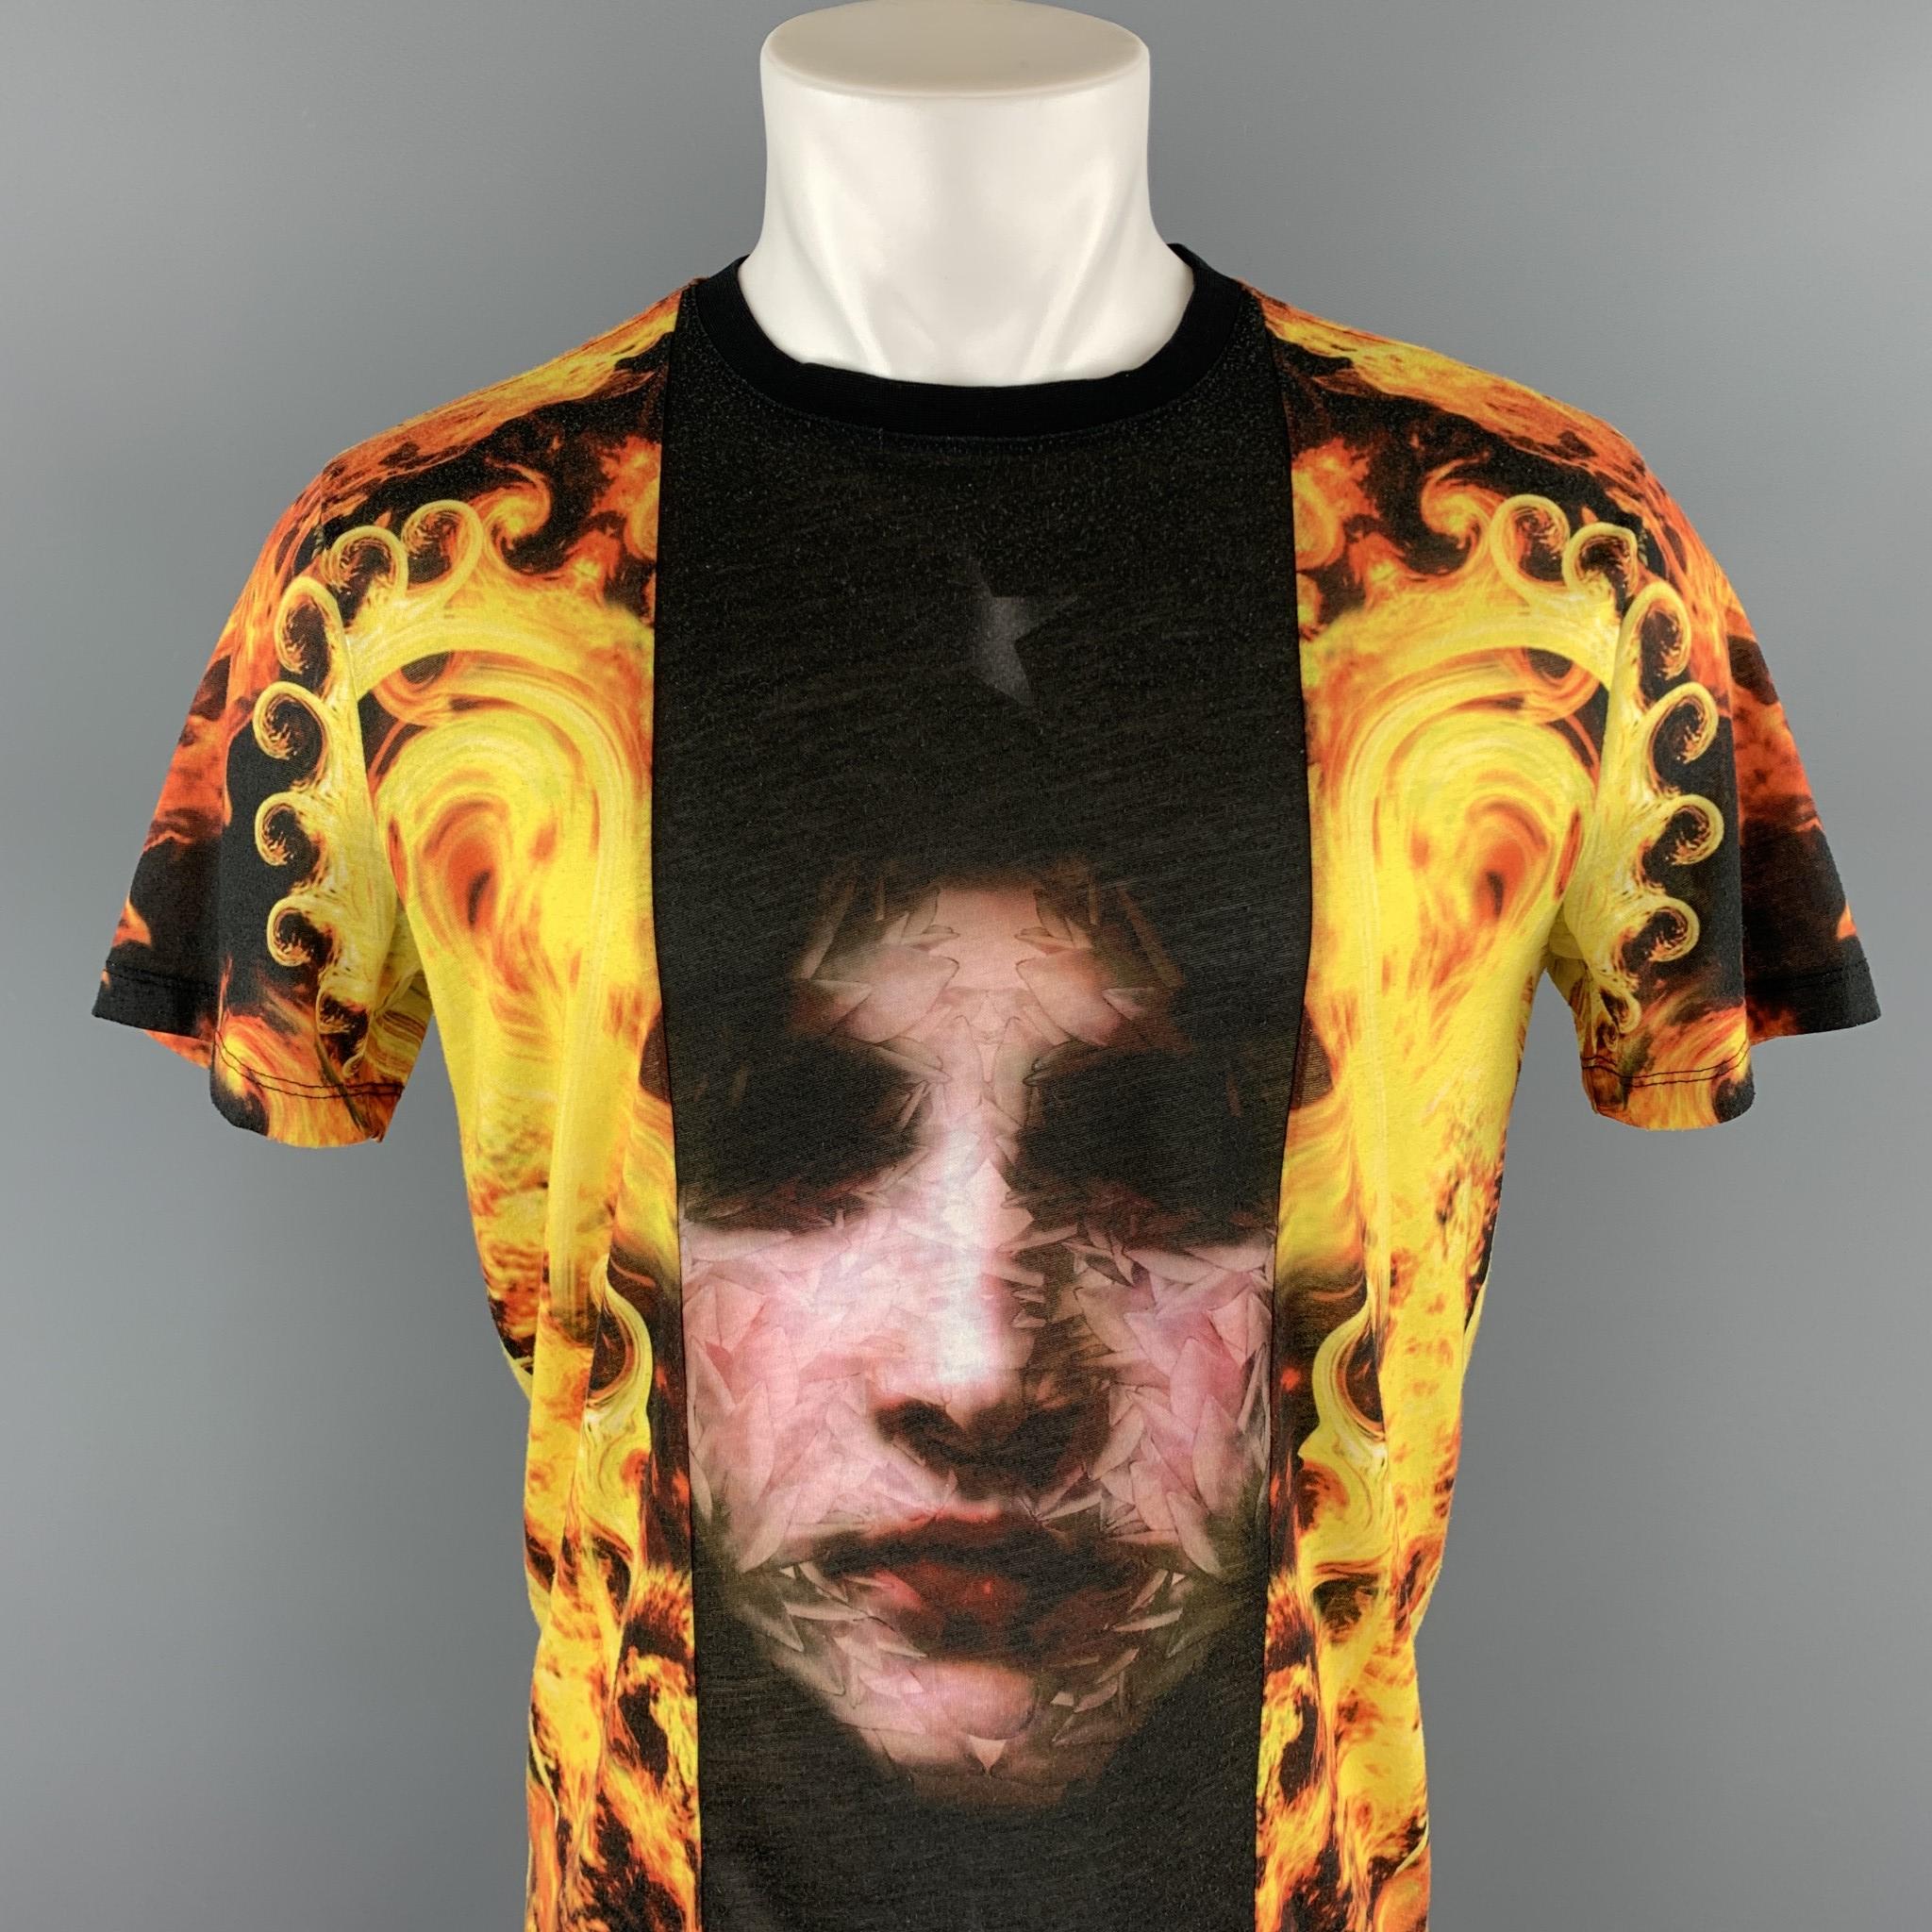 GIVENCHY t-shirt comes in a black & yellow polyester with the 